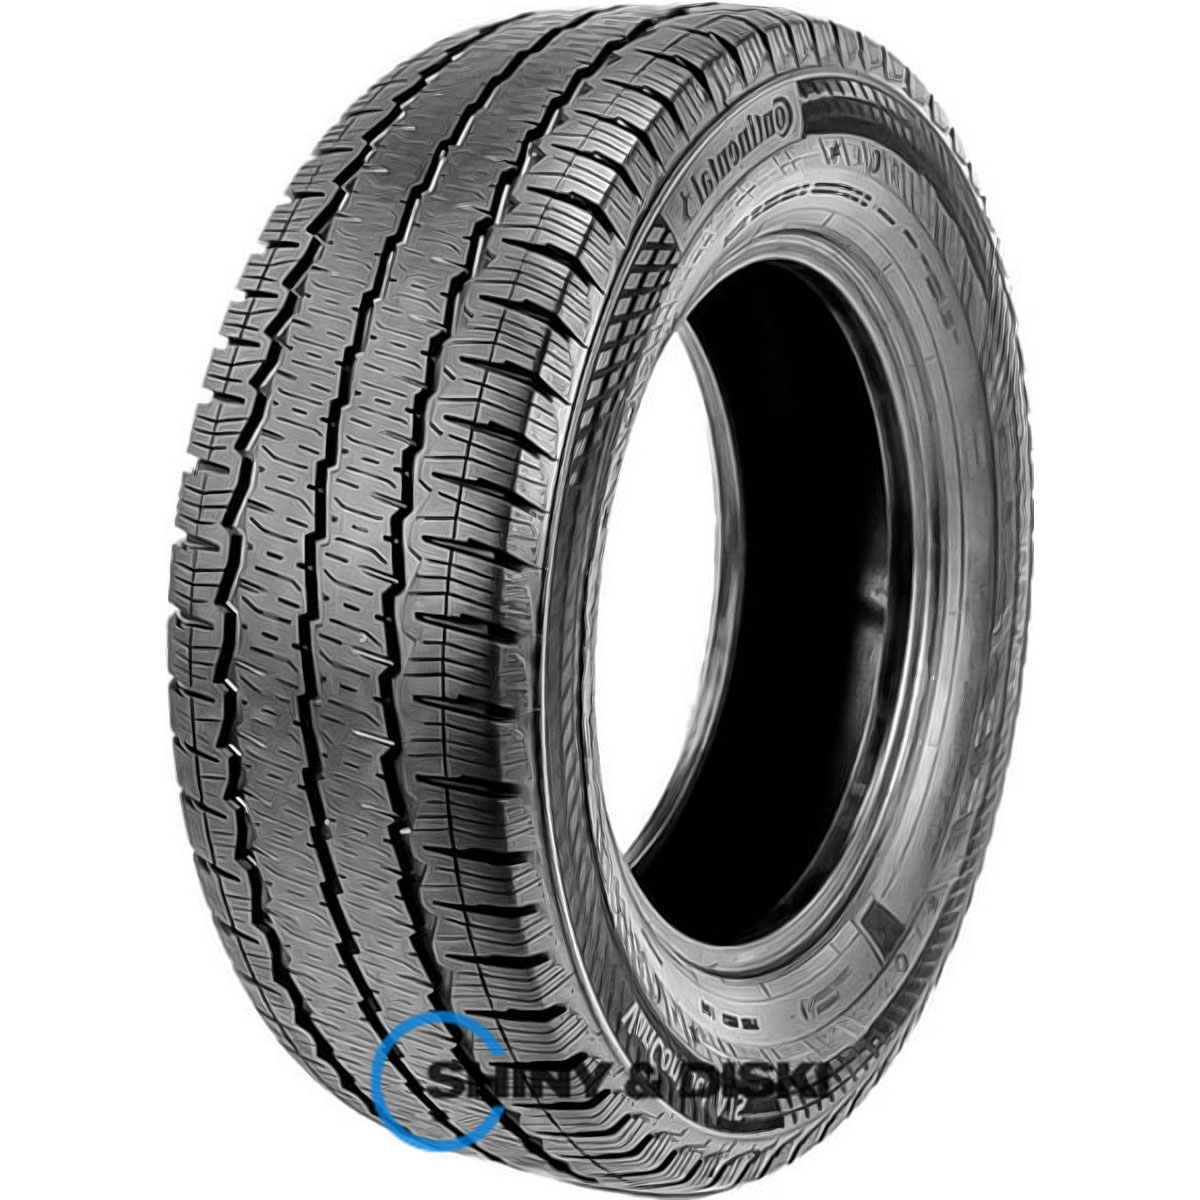 гума continental vancontact a/s 235/65 r16c 121/119r